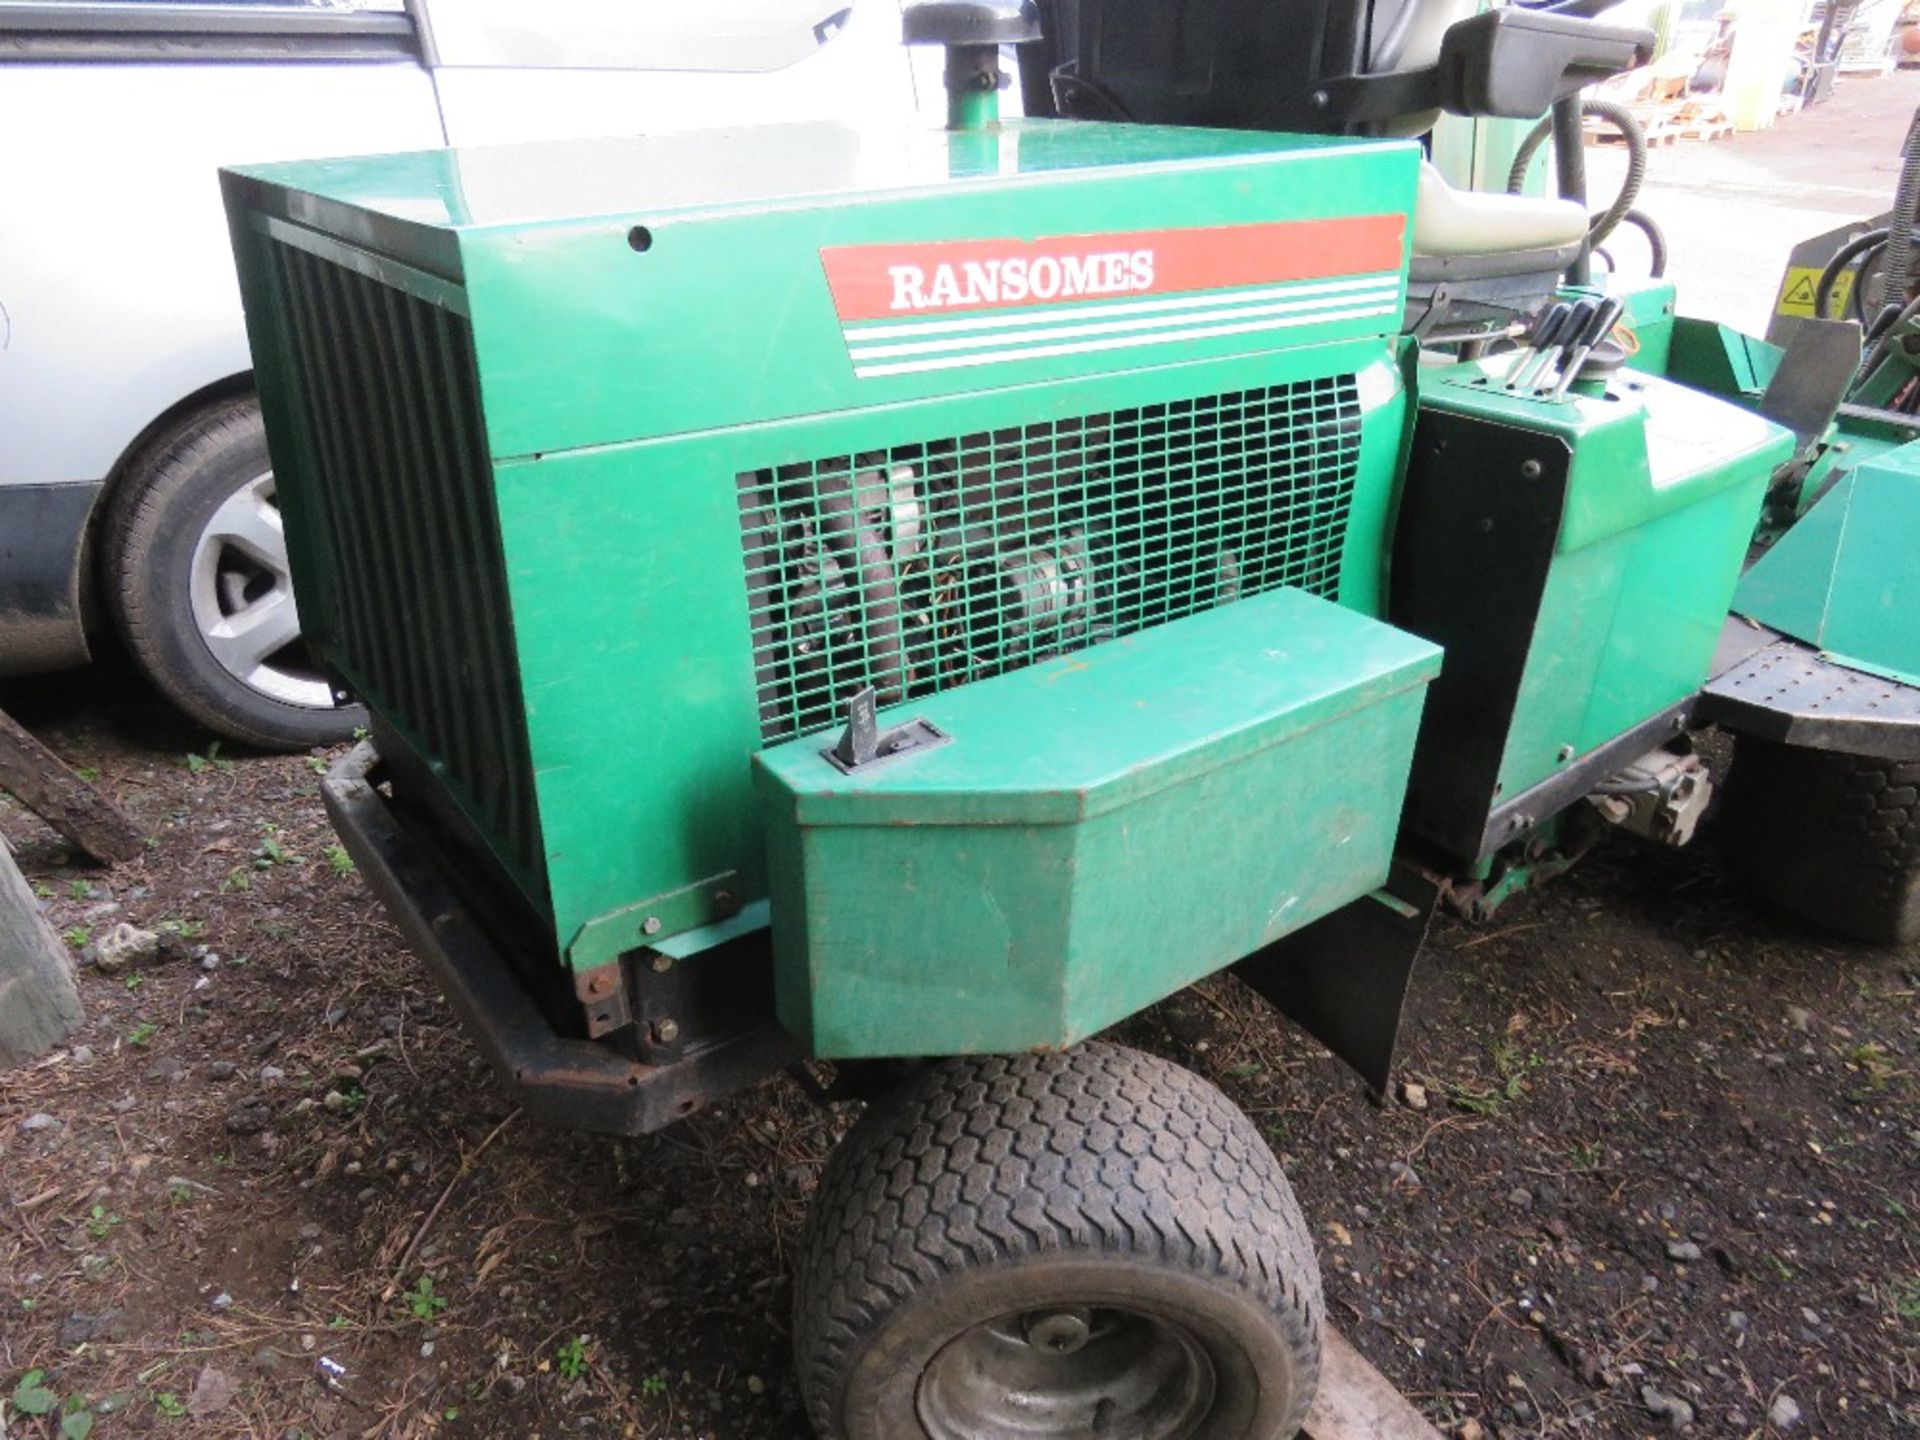 RANSOMES 213 TRIPLE RIDE ON CYLINDER MOWER WITH KUBOTA ENGINE. WHEN TESTED WAS SEEN TO RUN, DRIVE, M - Image 9 of 10